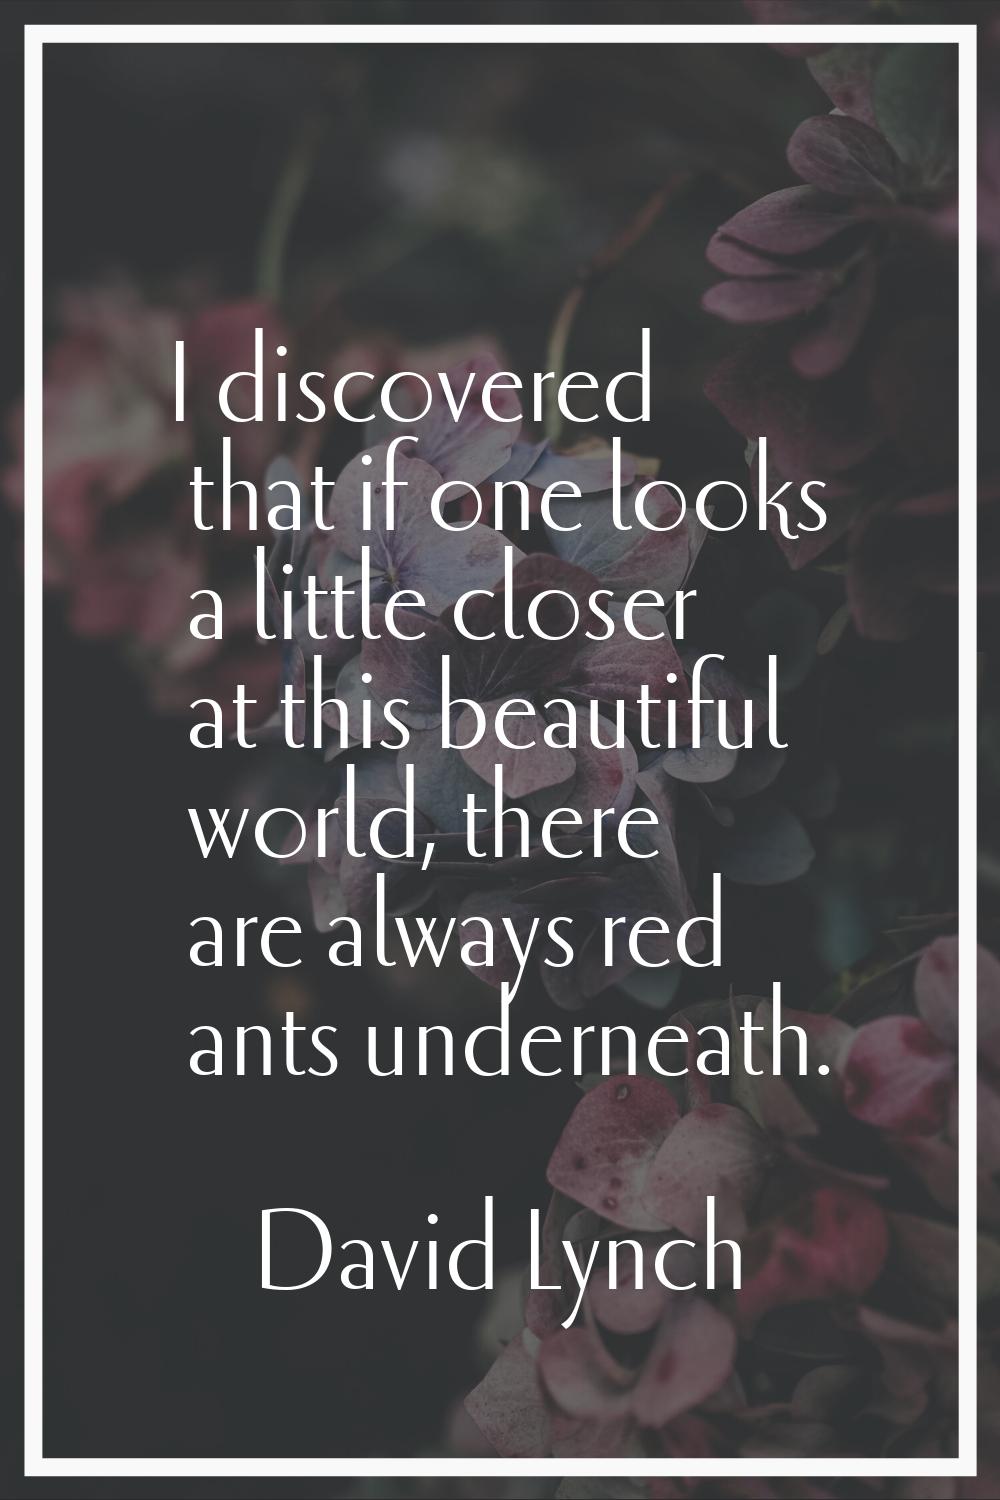 I discovered that if one looks a little closer at this beautiful world, there are always red ants u